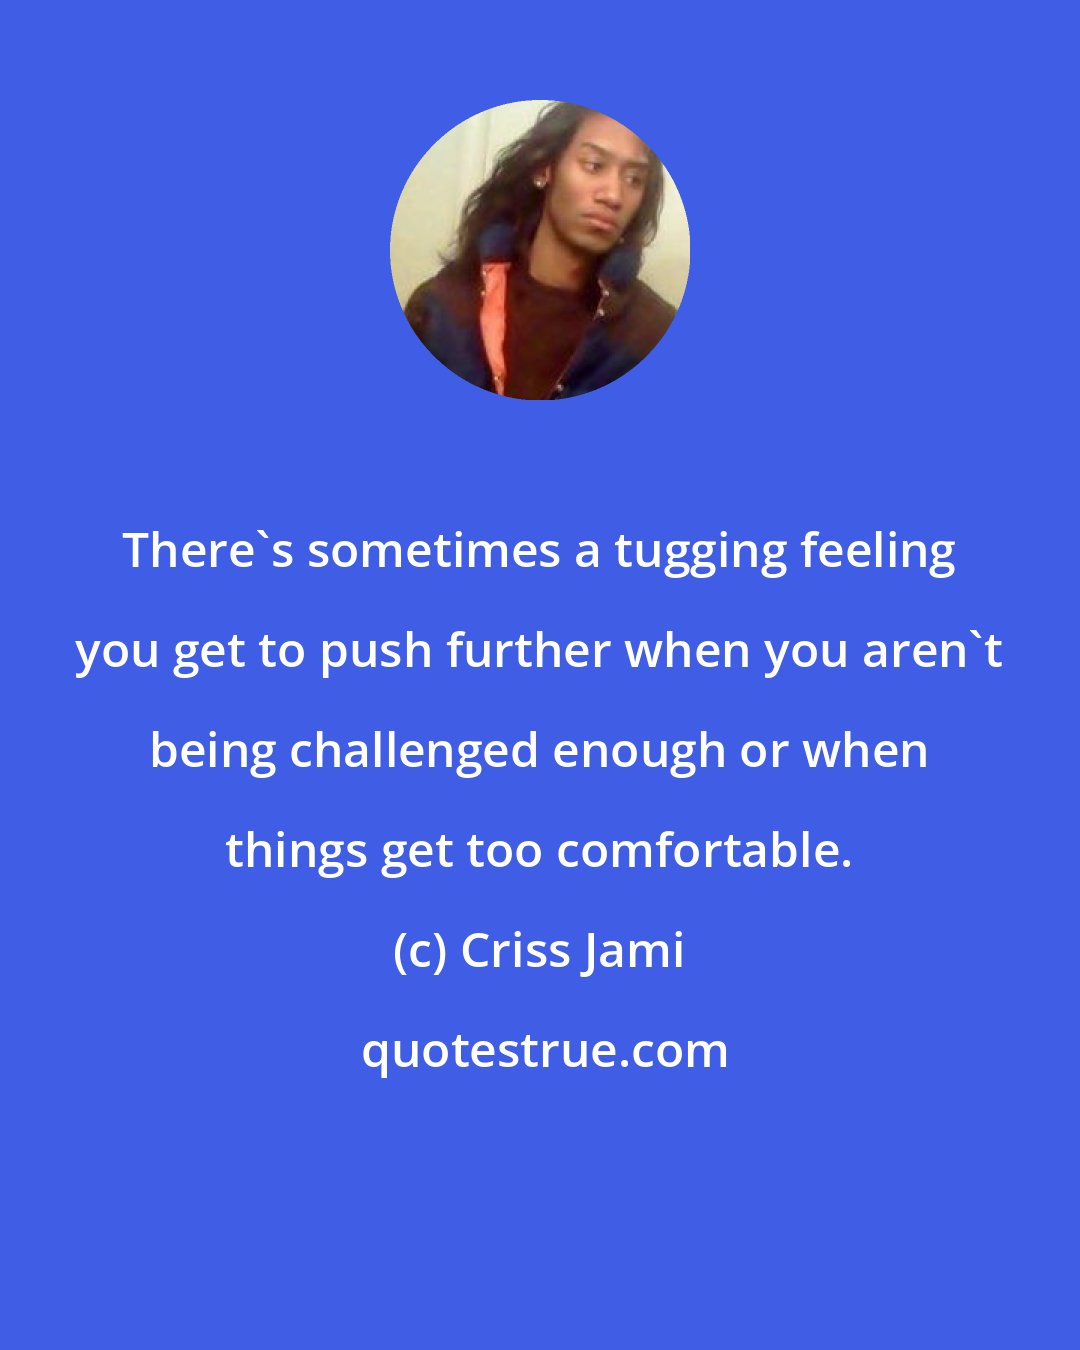 Criss Jami: There's sometimes a tugging feeling you get to push further when you aren't being challenged enough or when things get too comfortable.